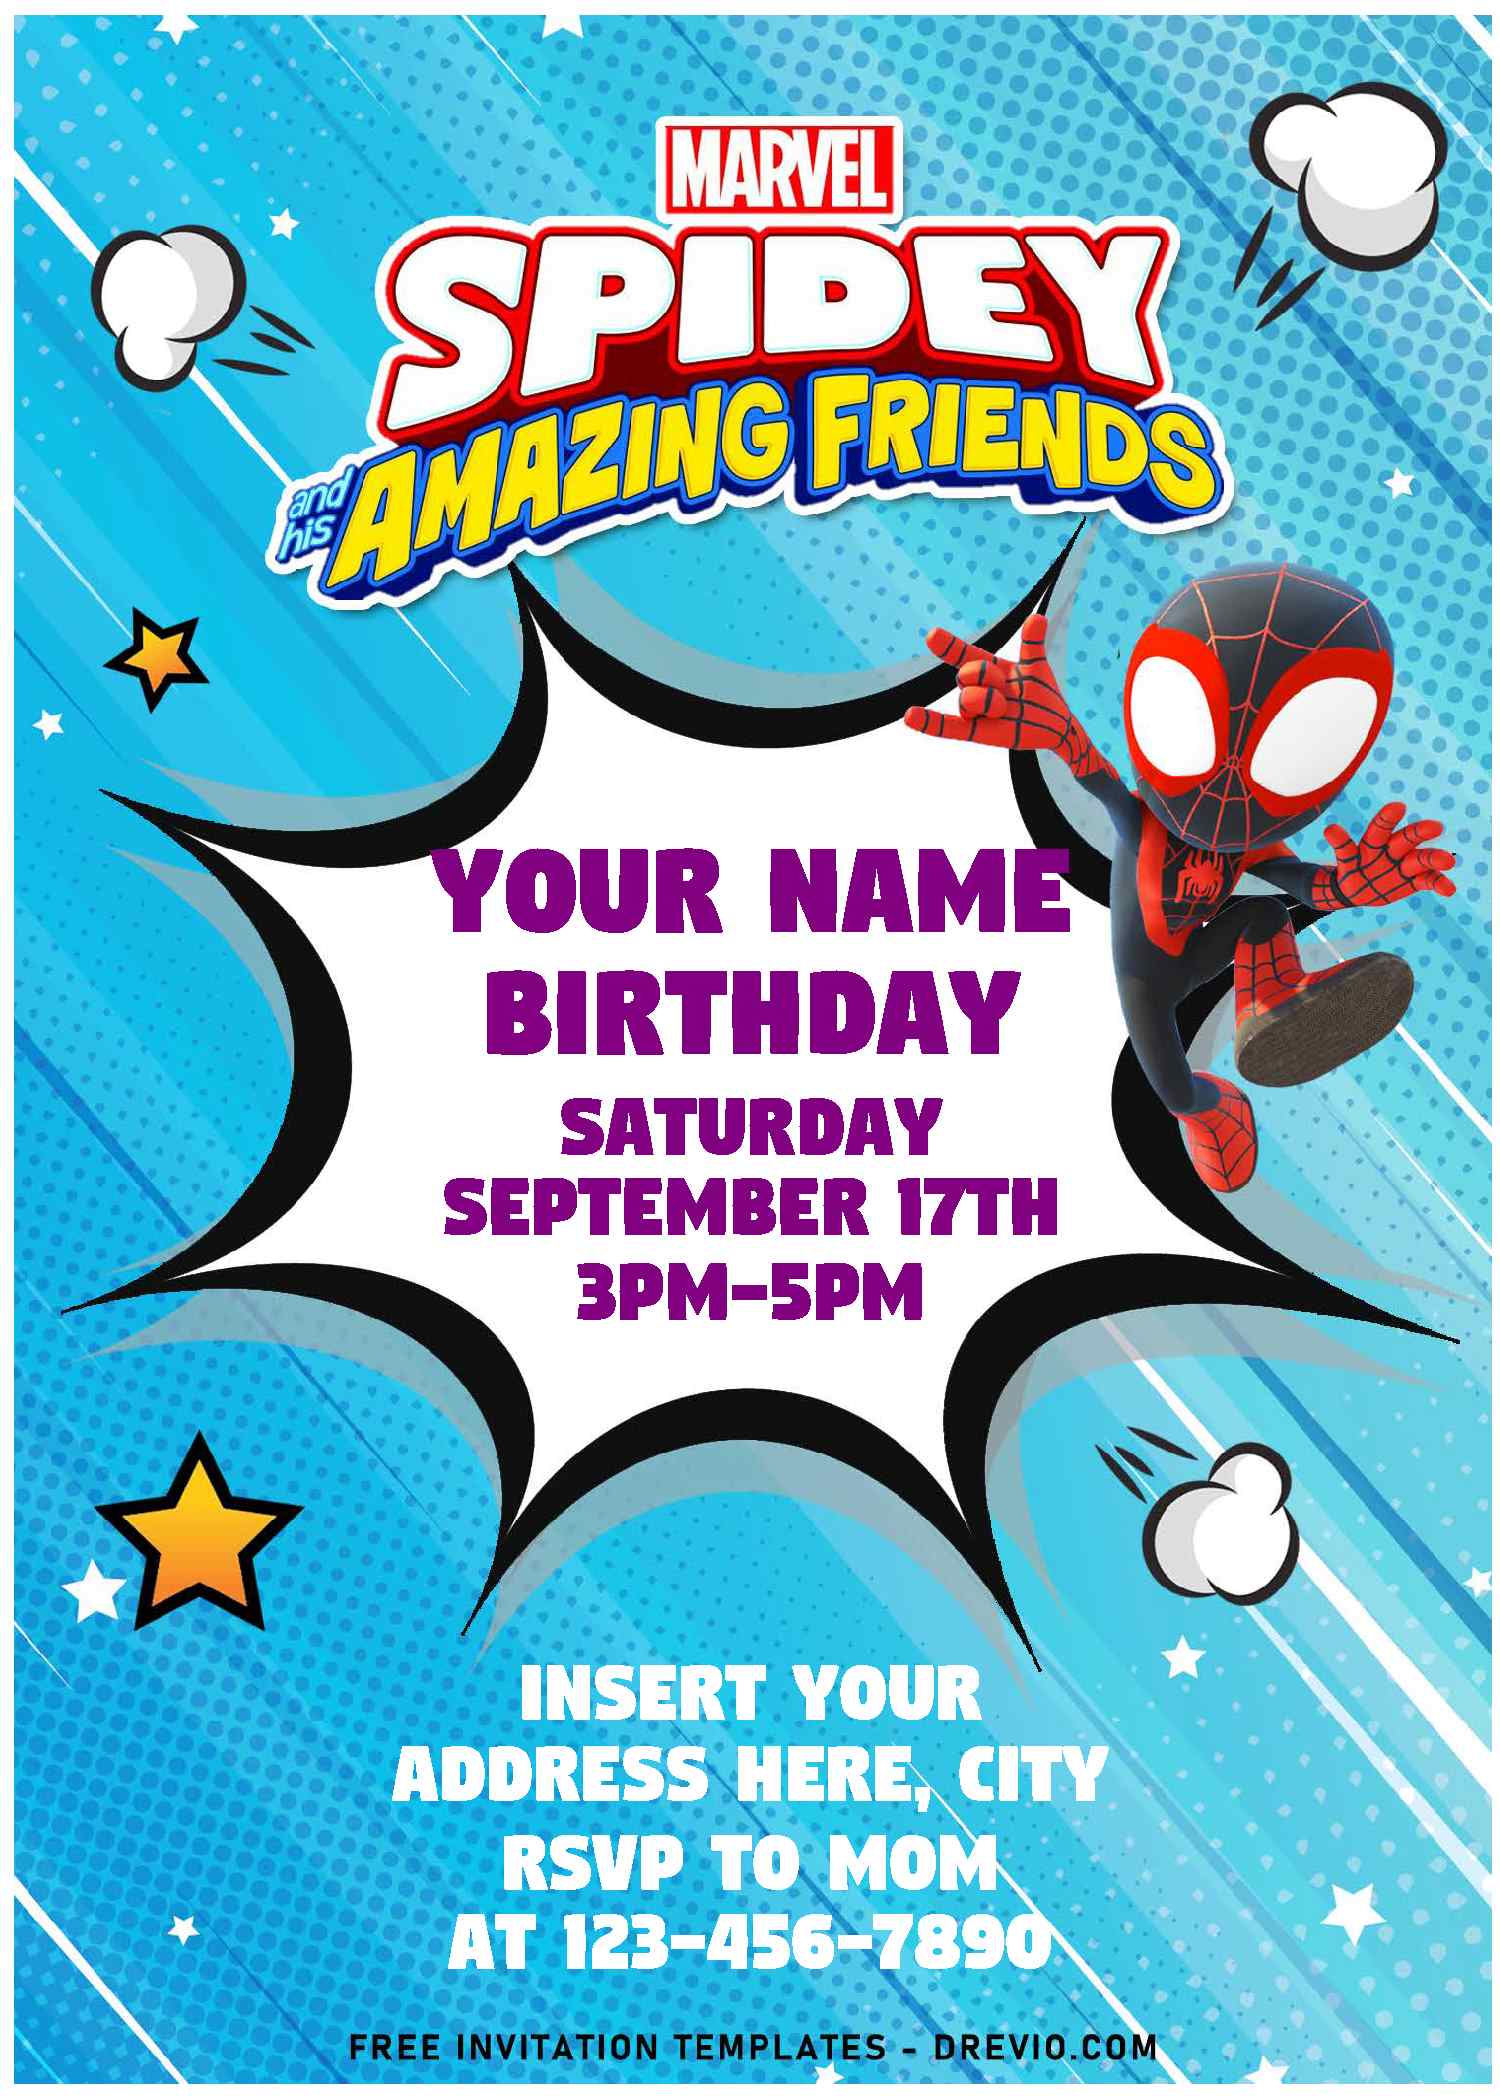 Spidey And His Amazing Friends Invitation Template Free Download